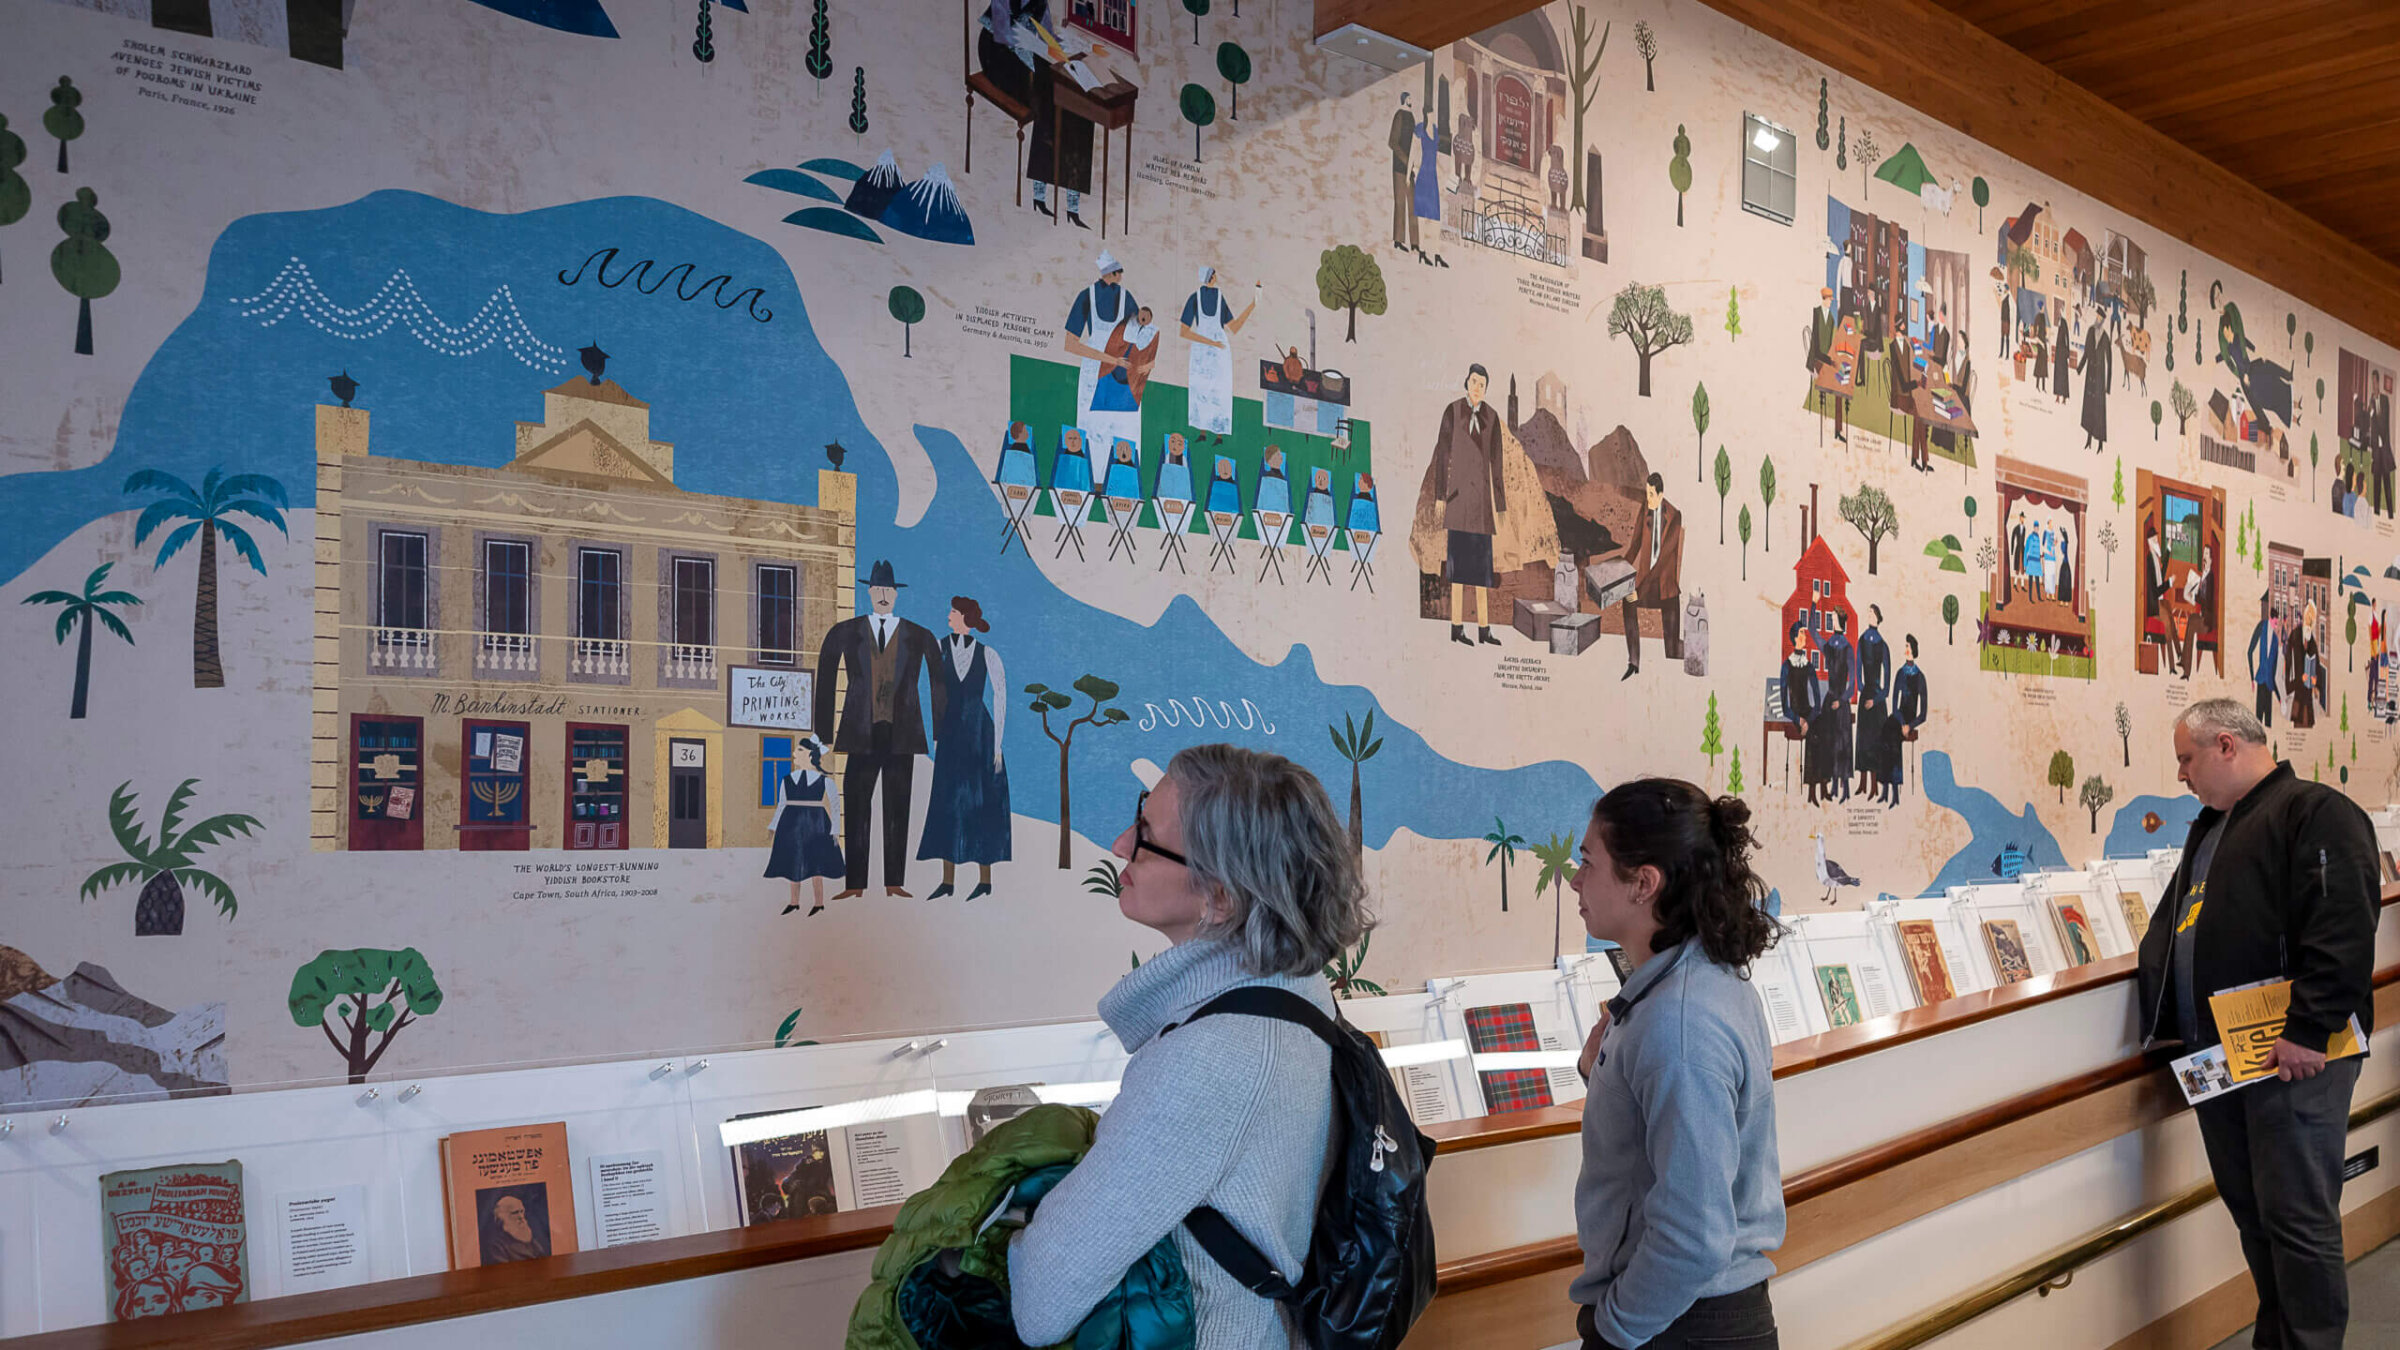 A colorful 60-foot mural depicting the history of Yiddish culture, commissioned for the Yiddish Book Center's new permanent exhibit from German illustrator Martin Haake.